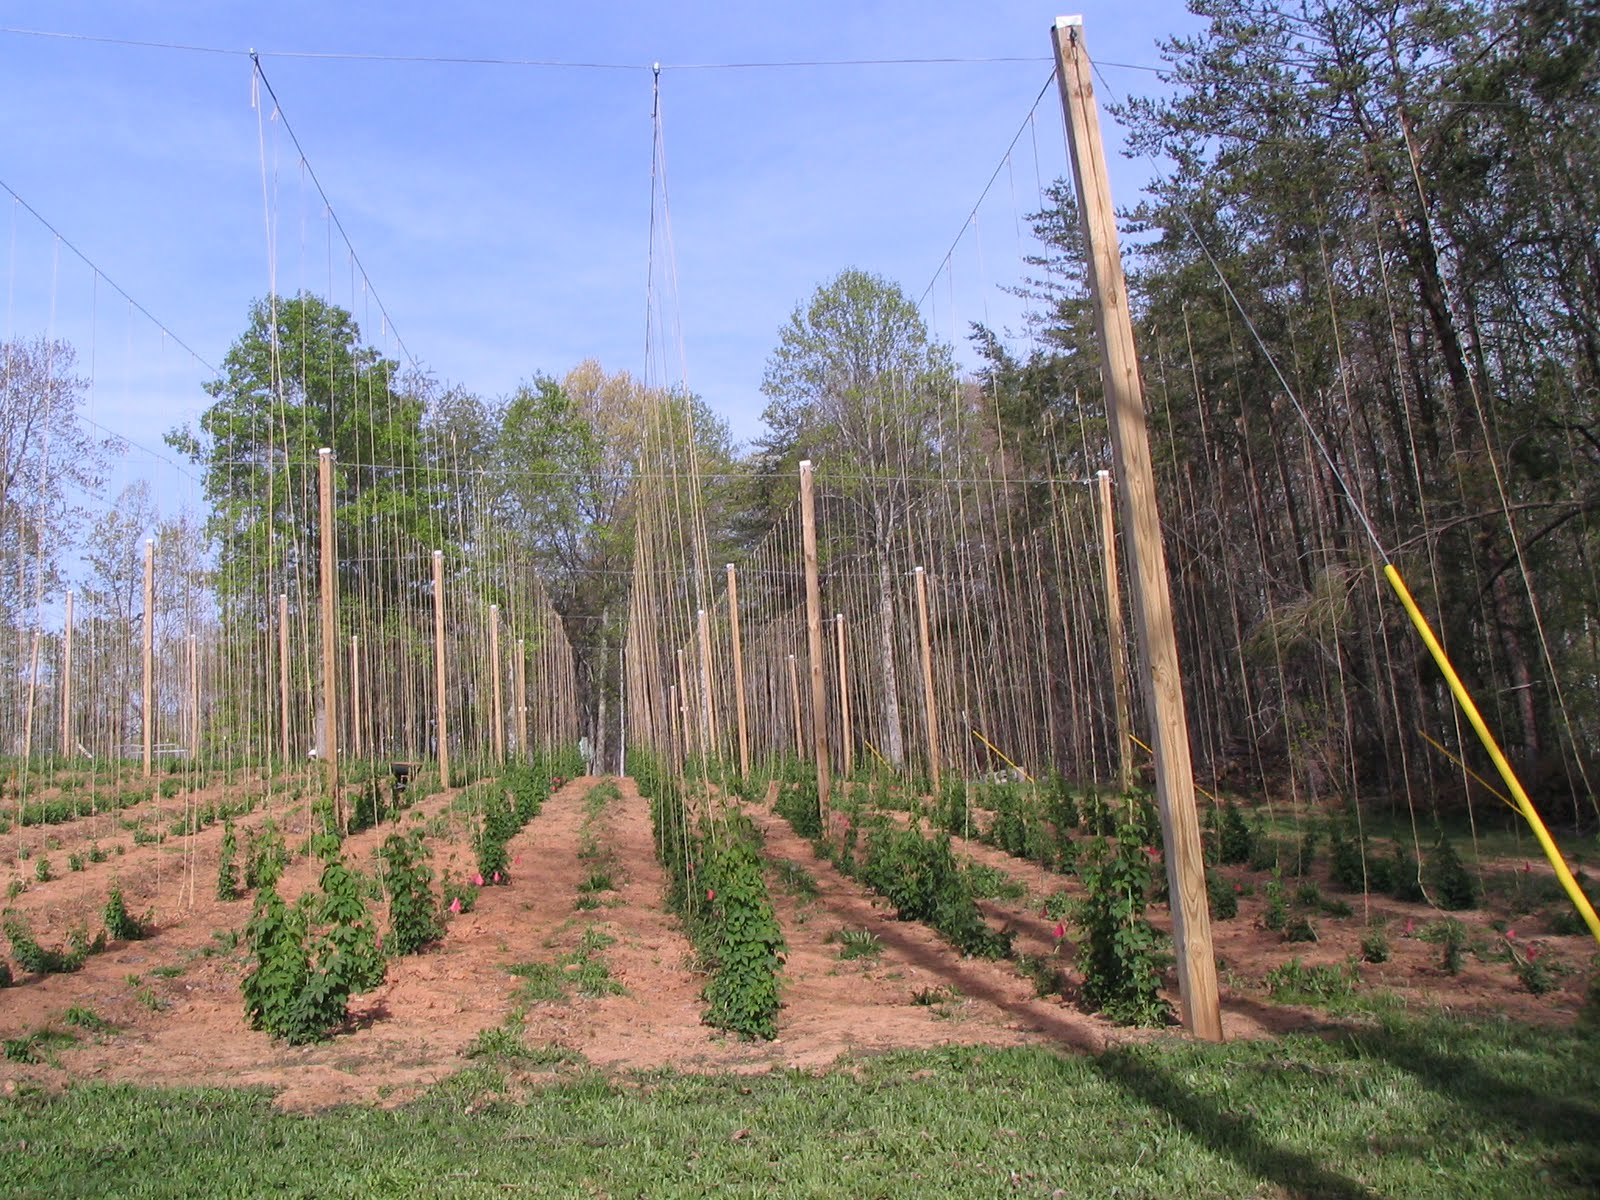 Organics Where To Get Information On Growing Hops In North Carolina